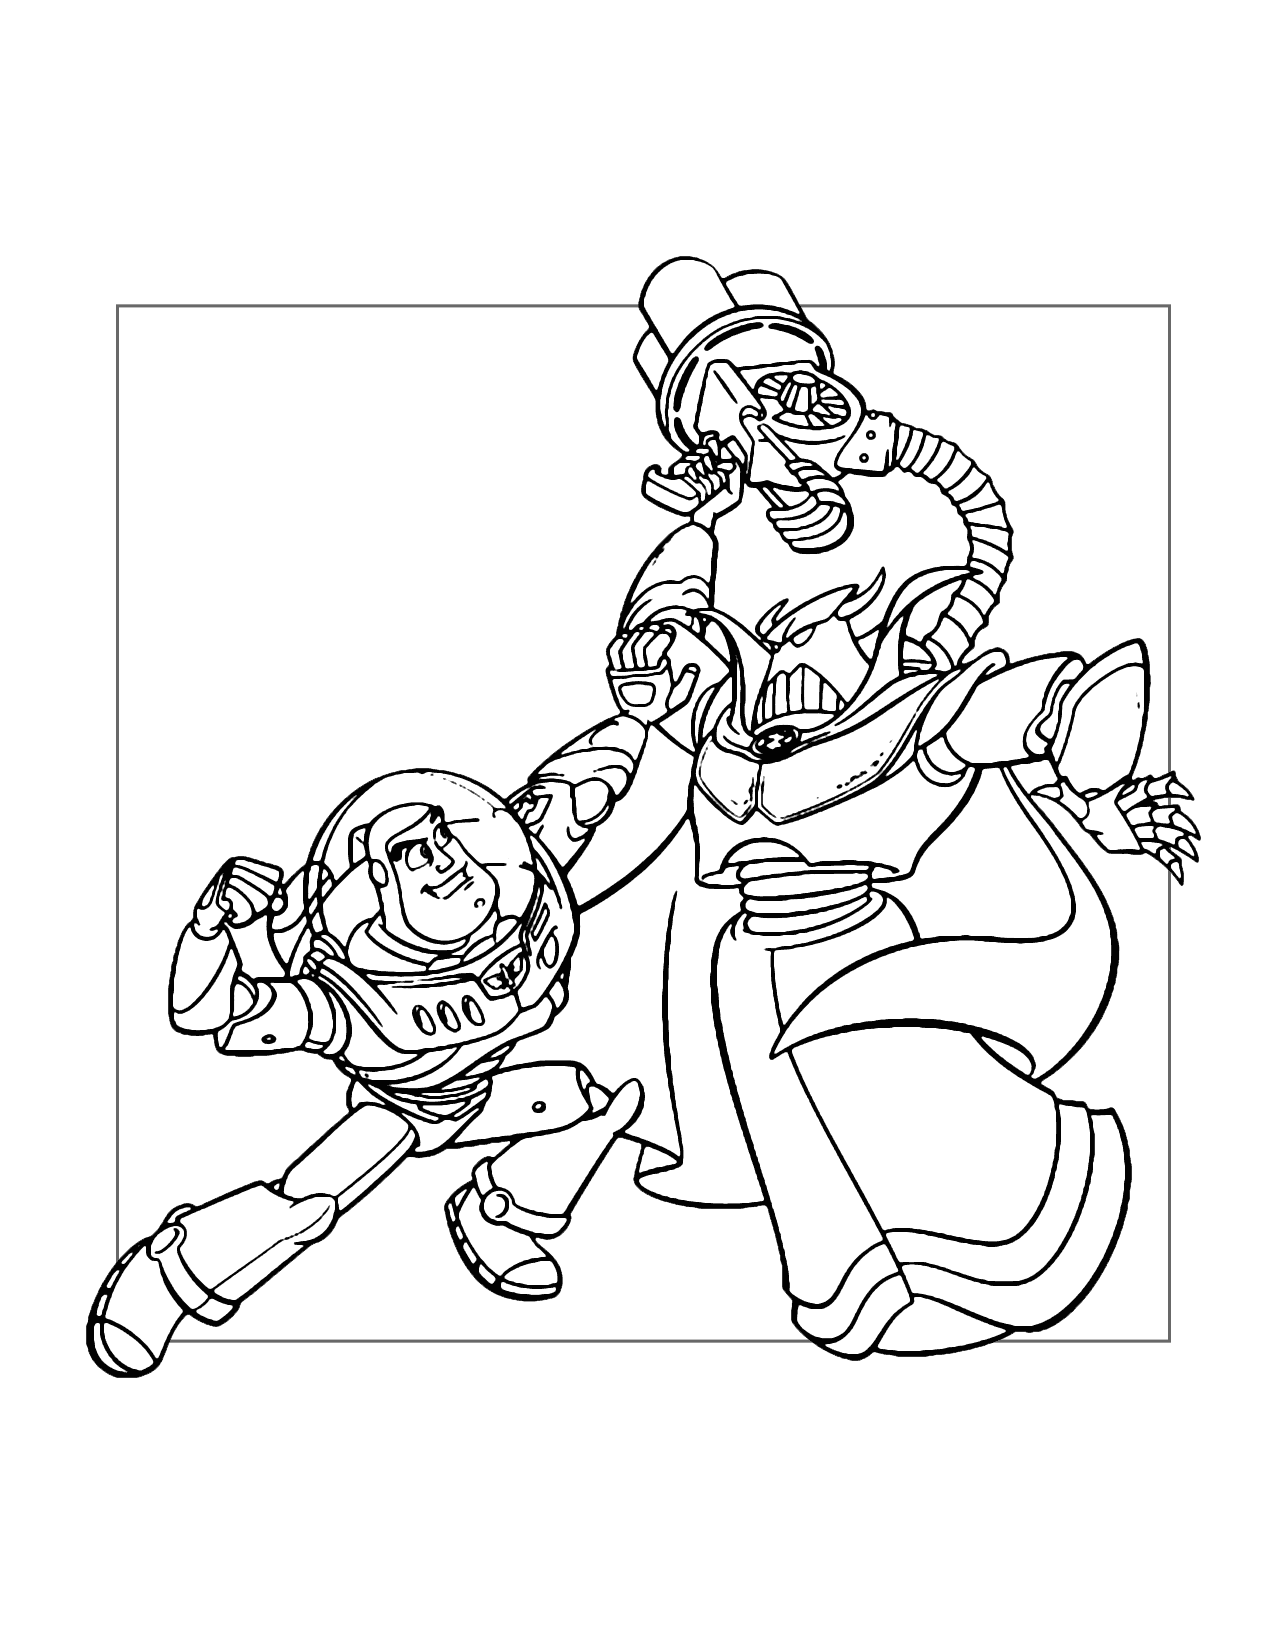 Buzz Fighting Zurg Coloring Page